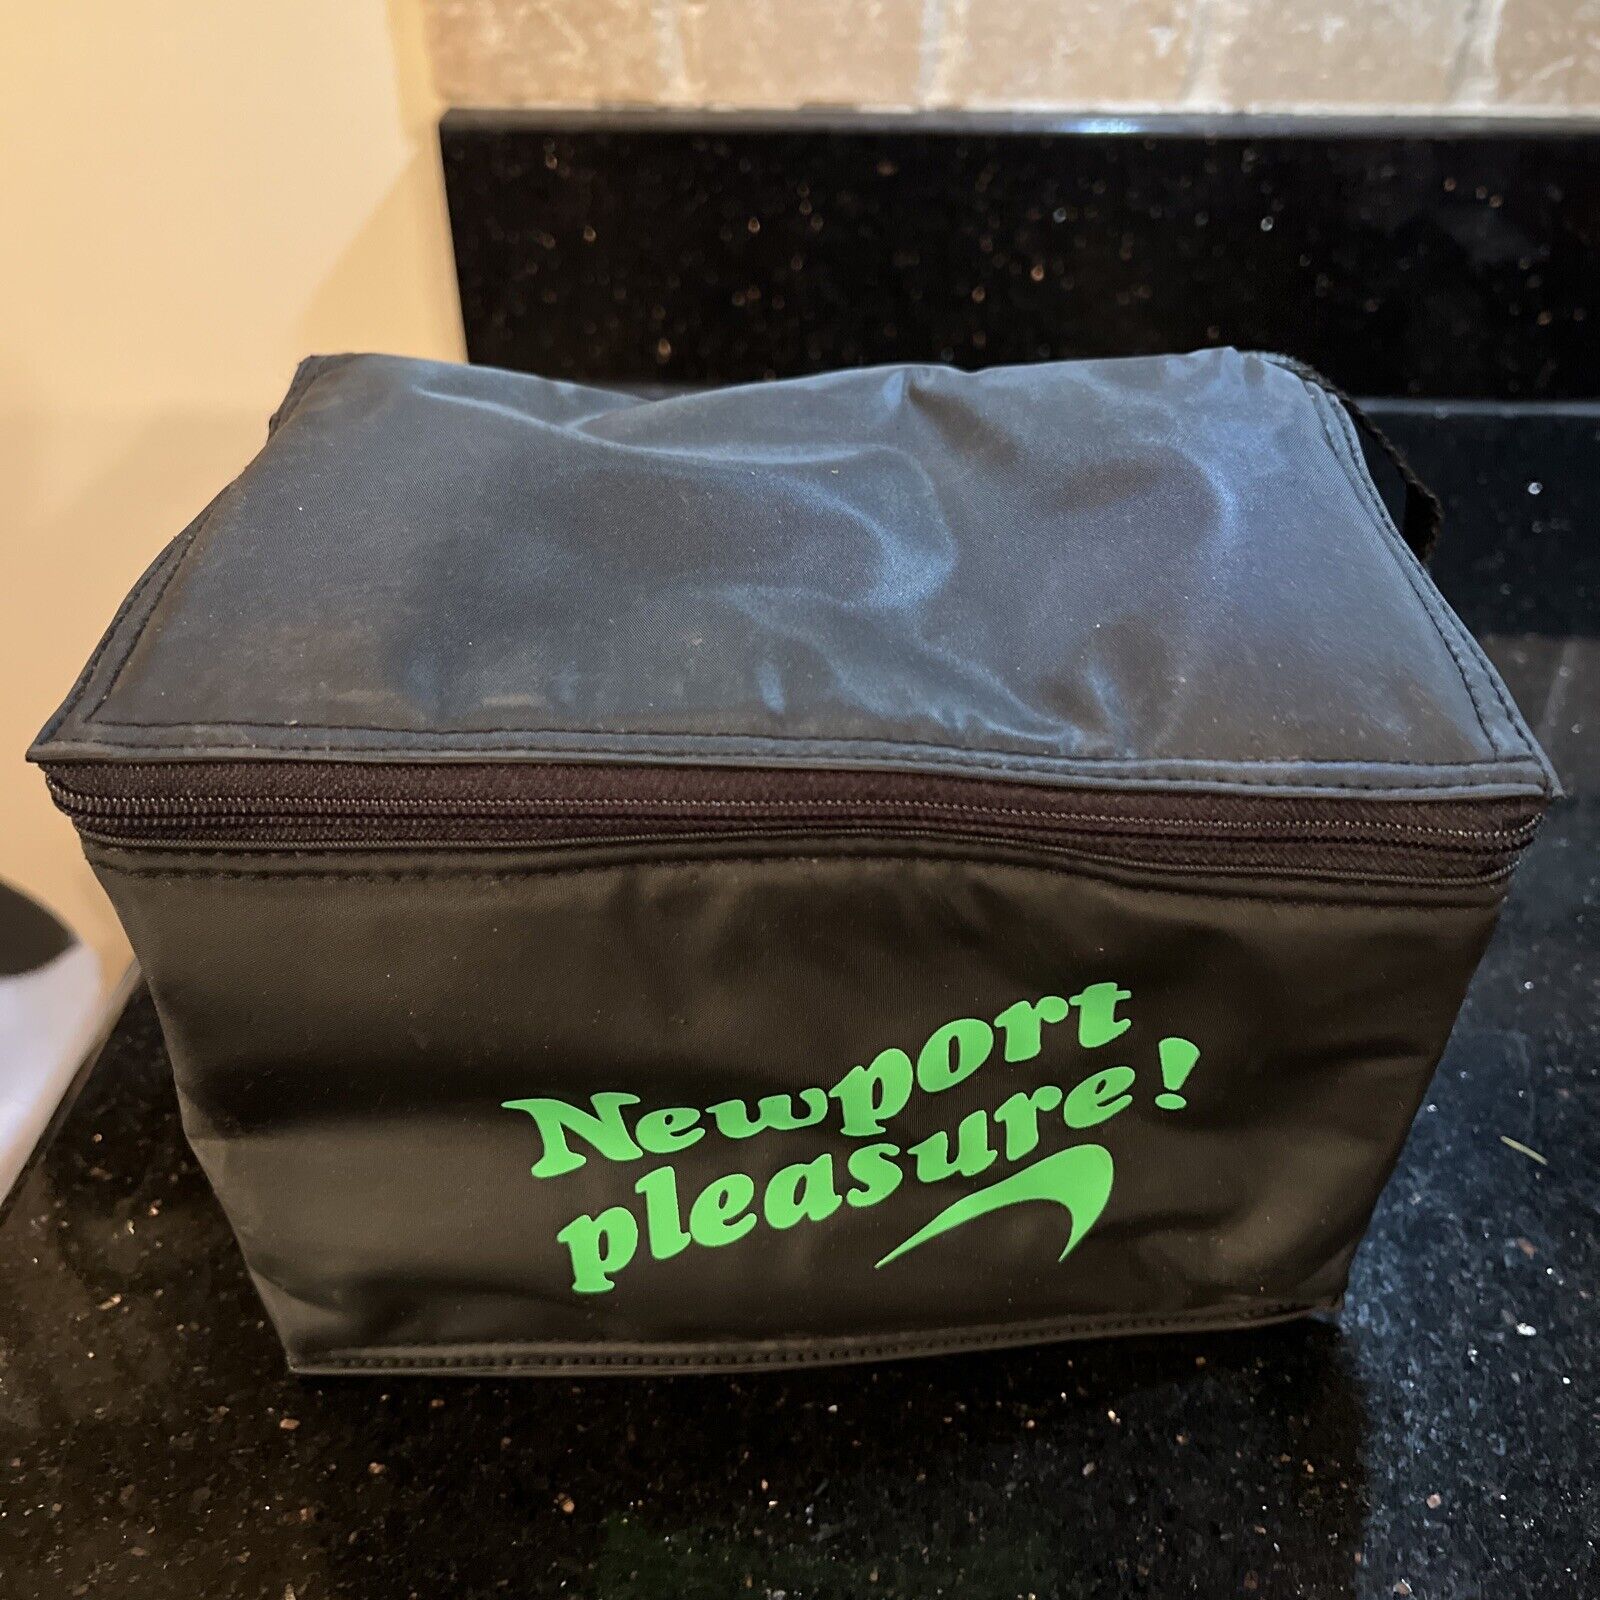 Vintage Newport Pleasure Black Lunch Box 6 Pack insulated collapsable Cooler